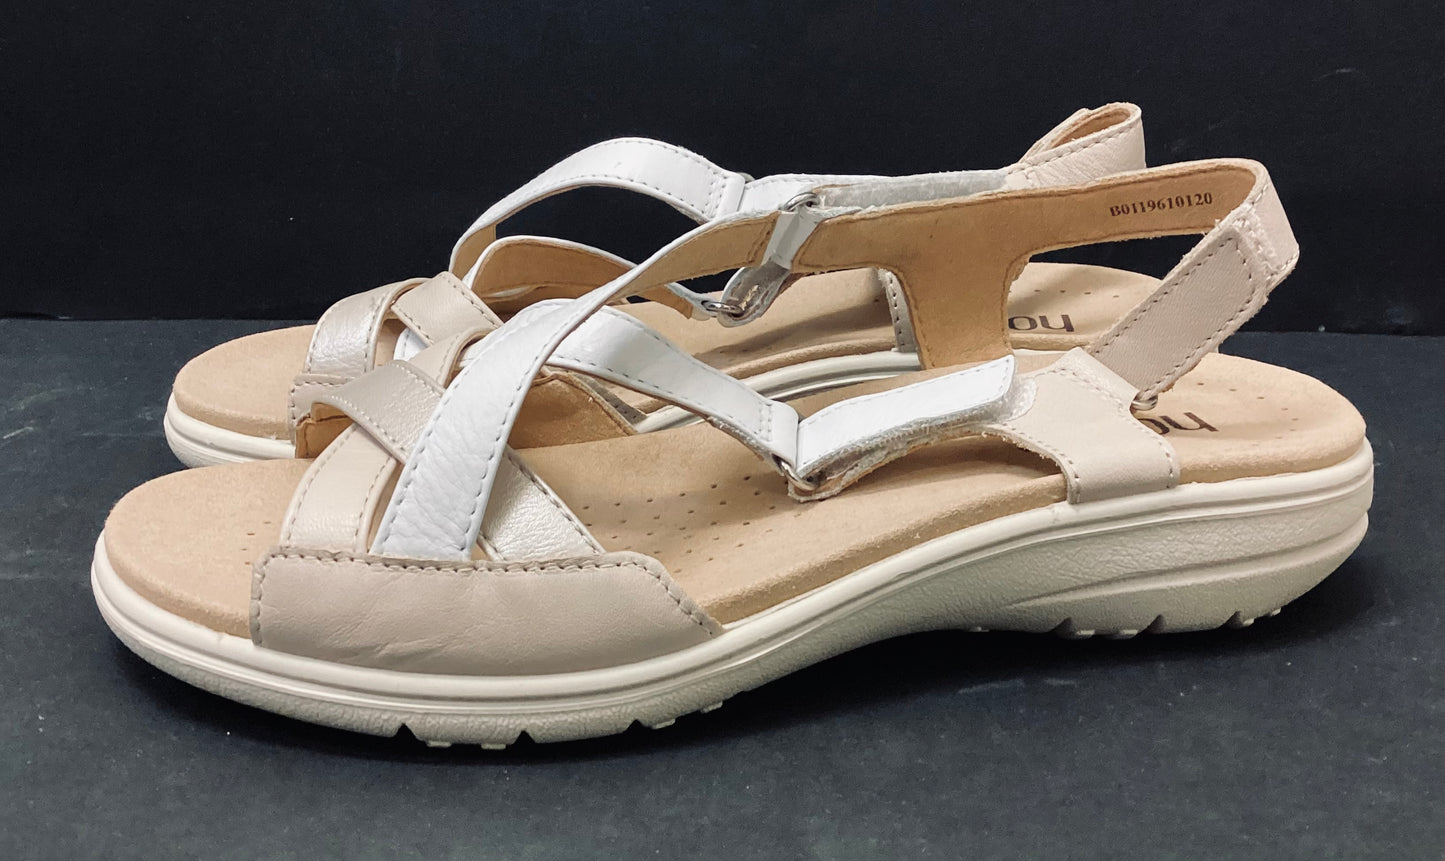 Hotter “Lucy” White and Beige Sandals size 5